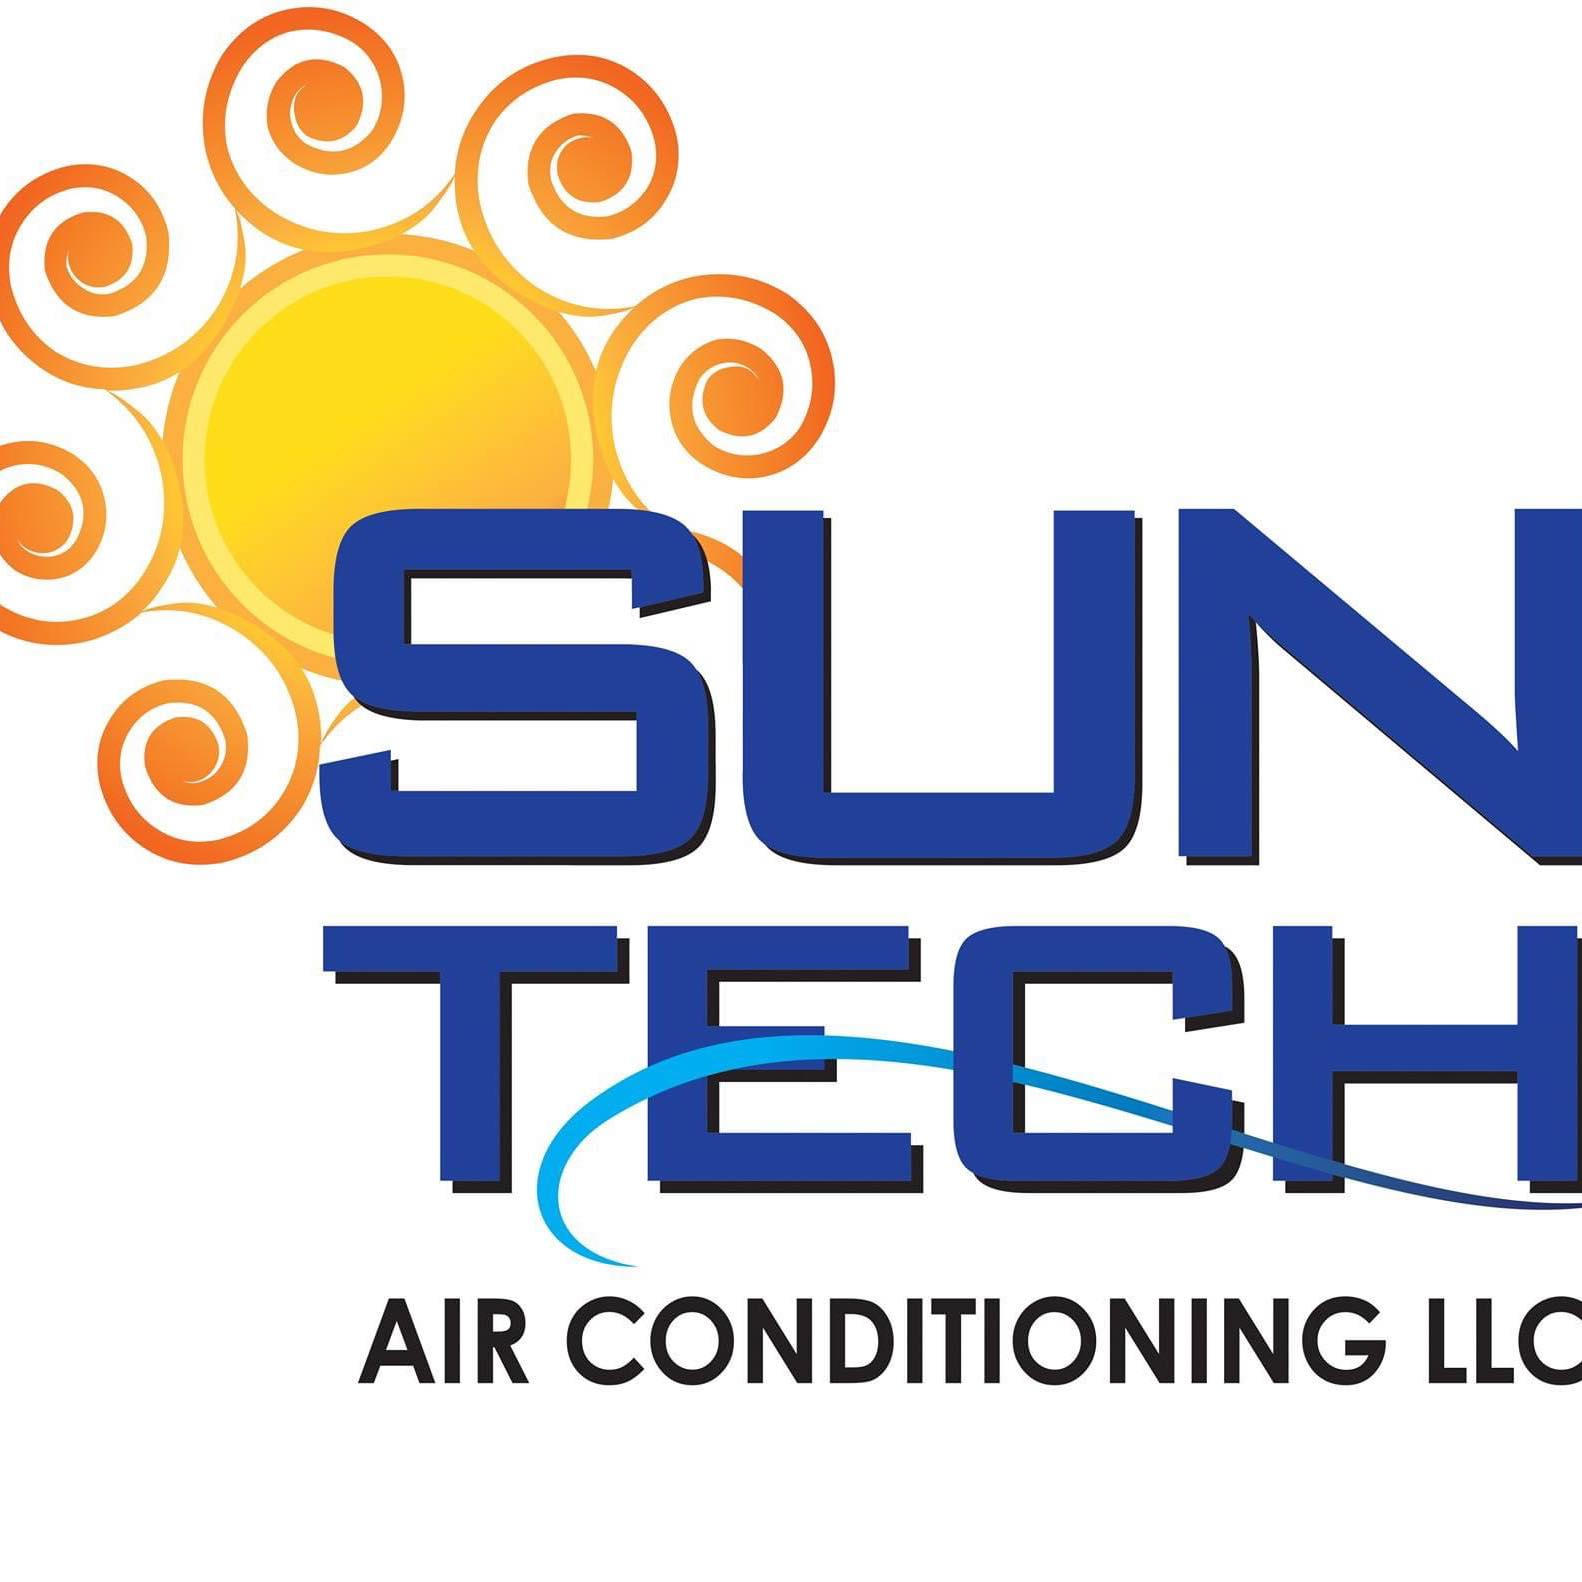 Sun Tech Air Conditioning Glendale Explains How to Choose the Right HVAC System for Installation